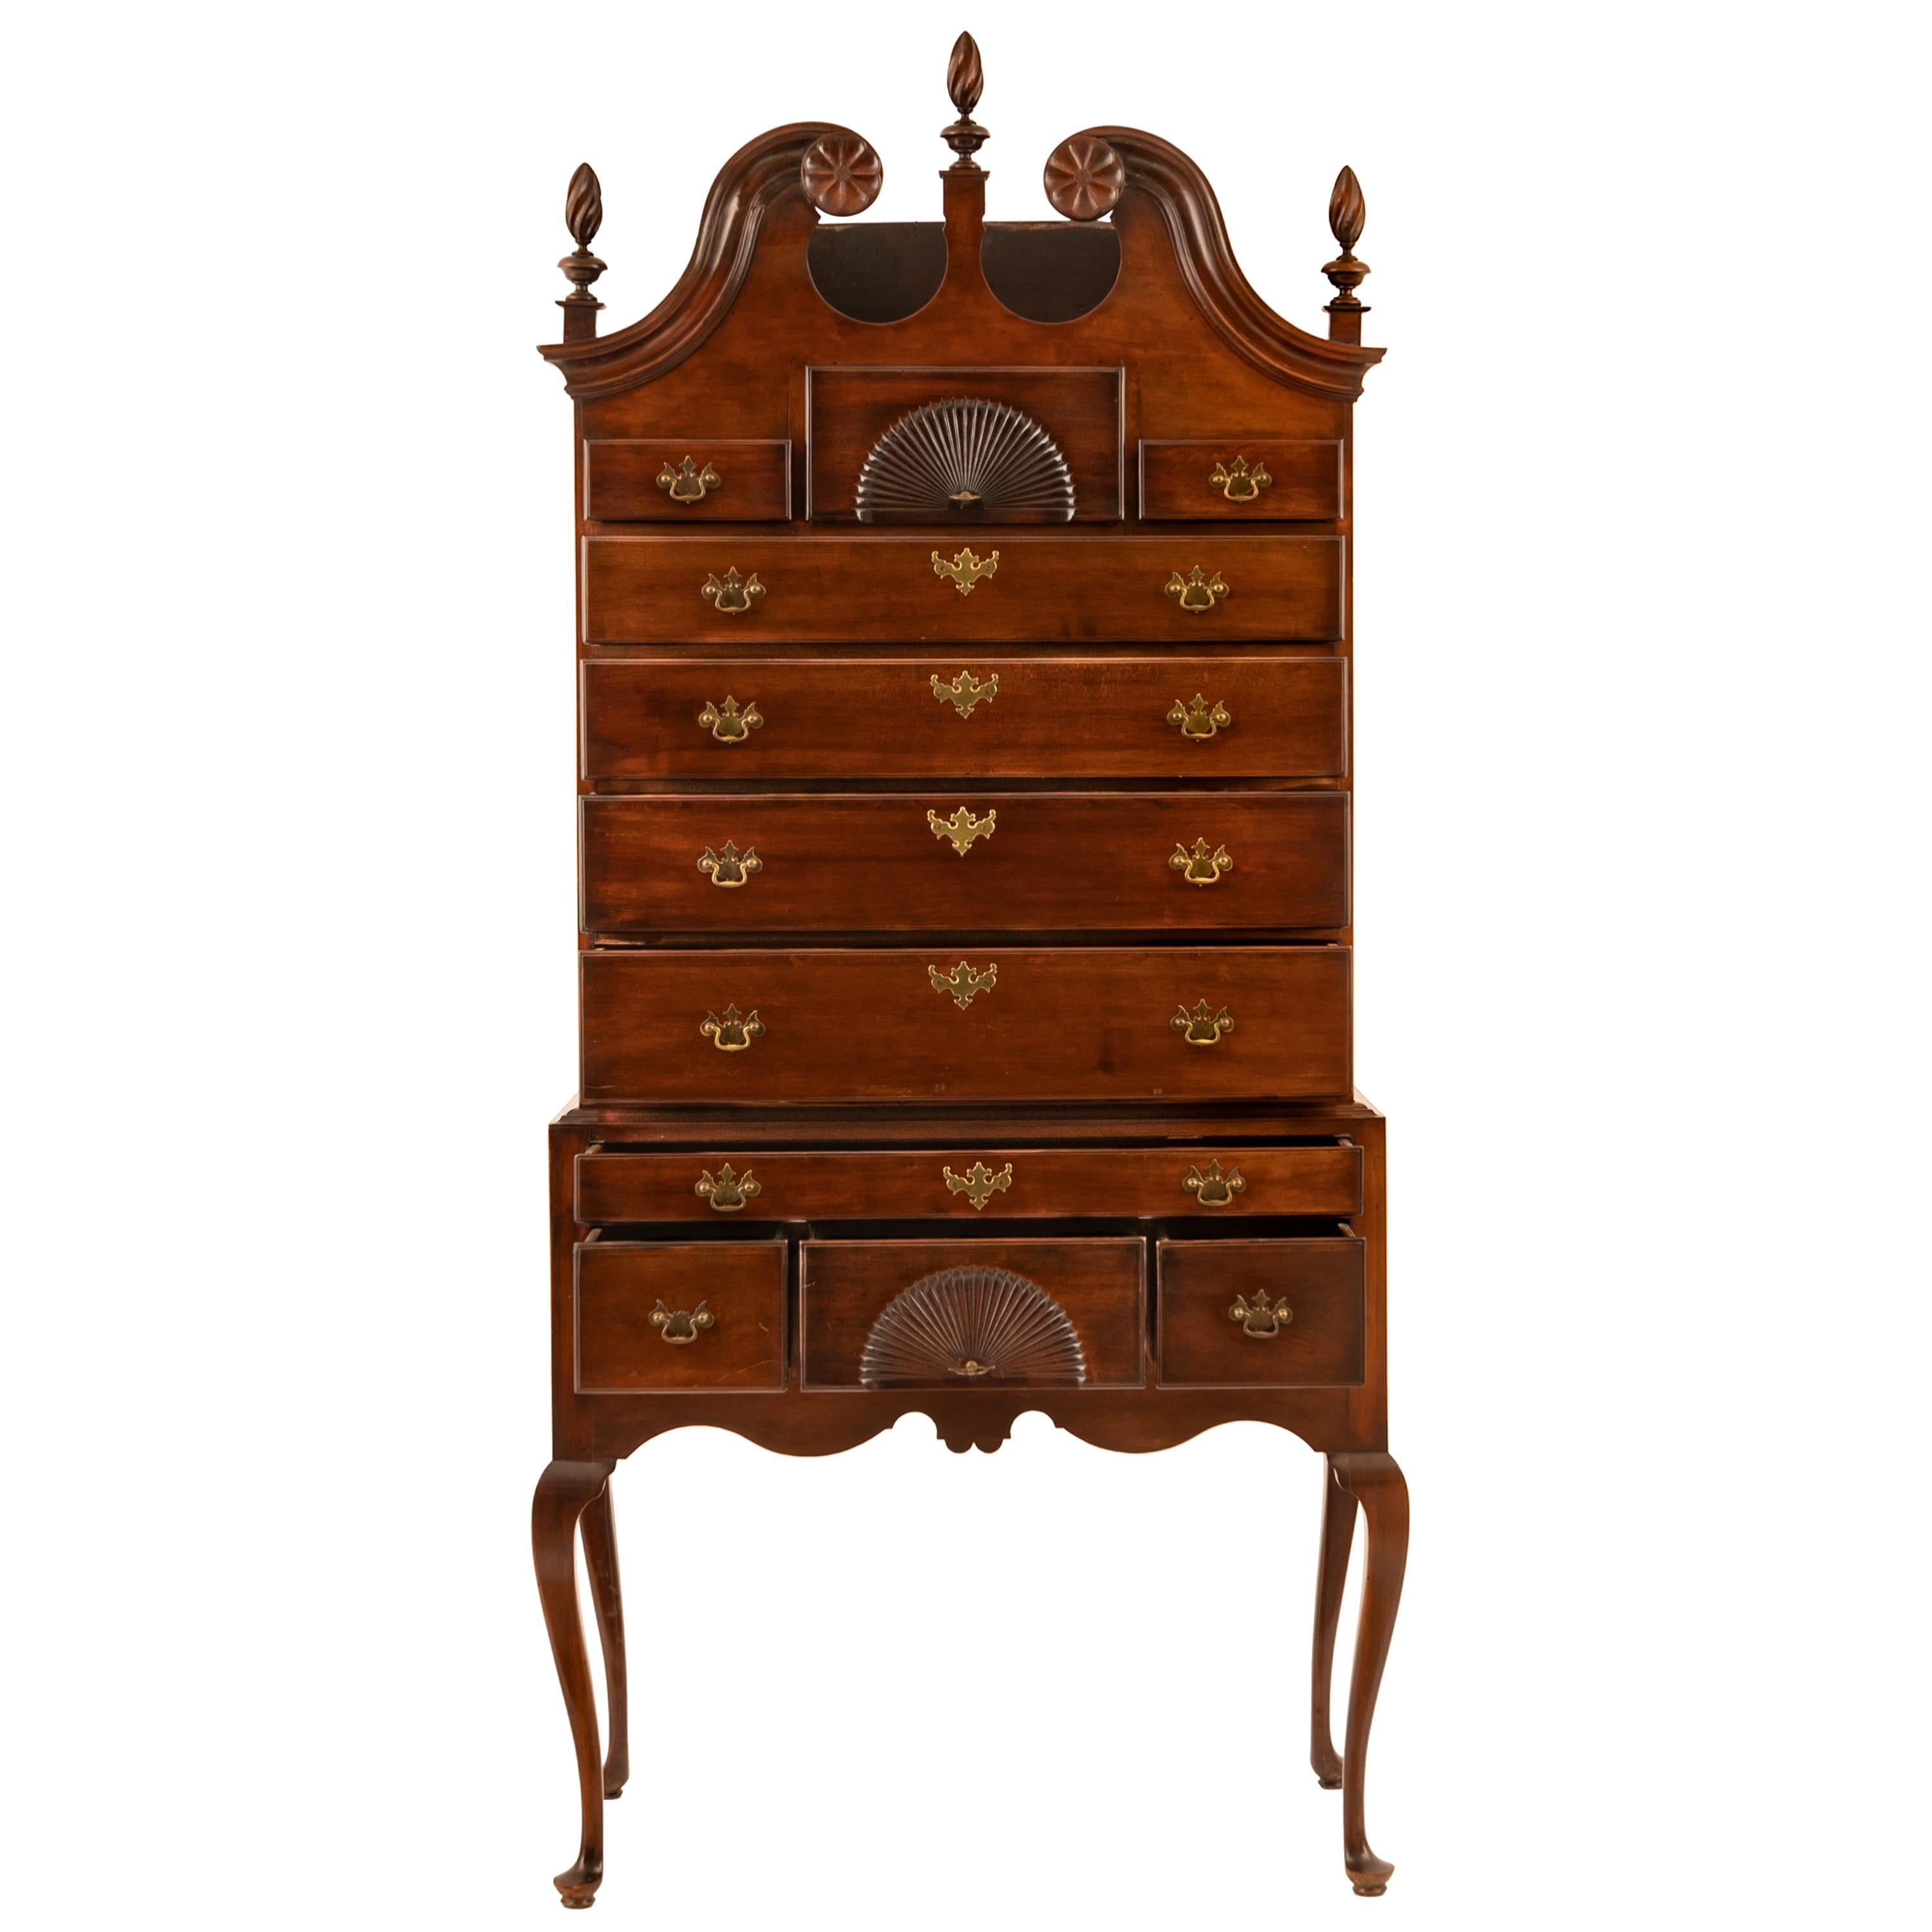 Chippendale Antique American Mahogany Highboy Chest on Stand Salem Massachusetts, 1760